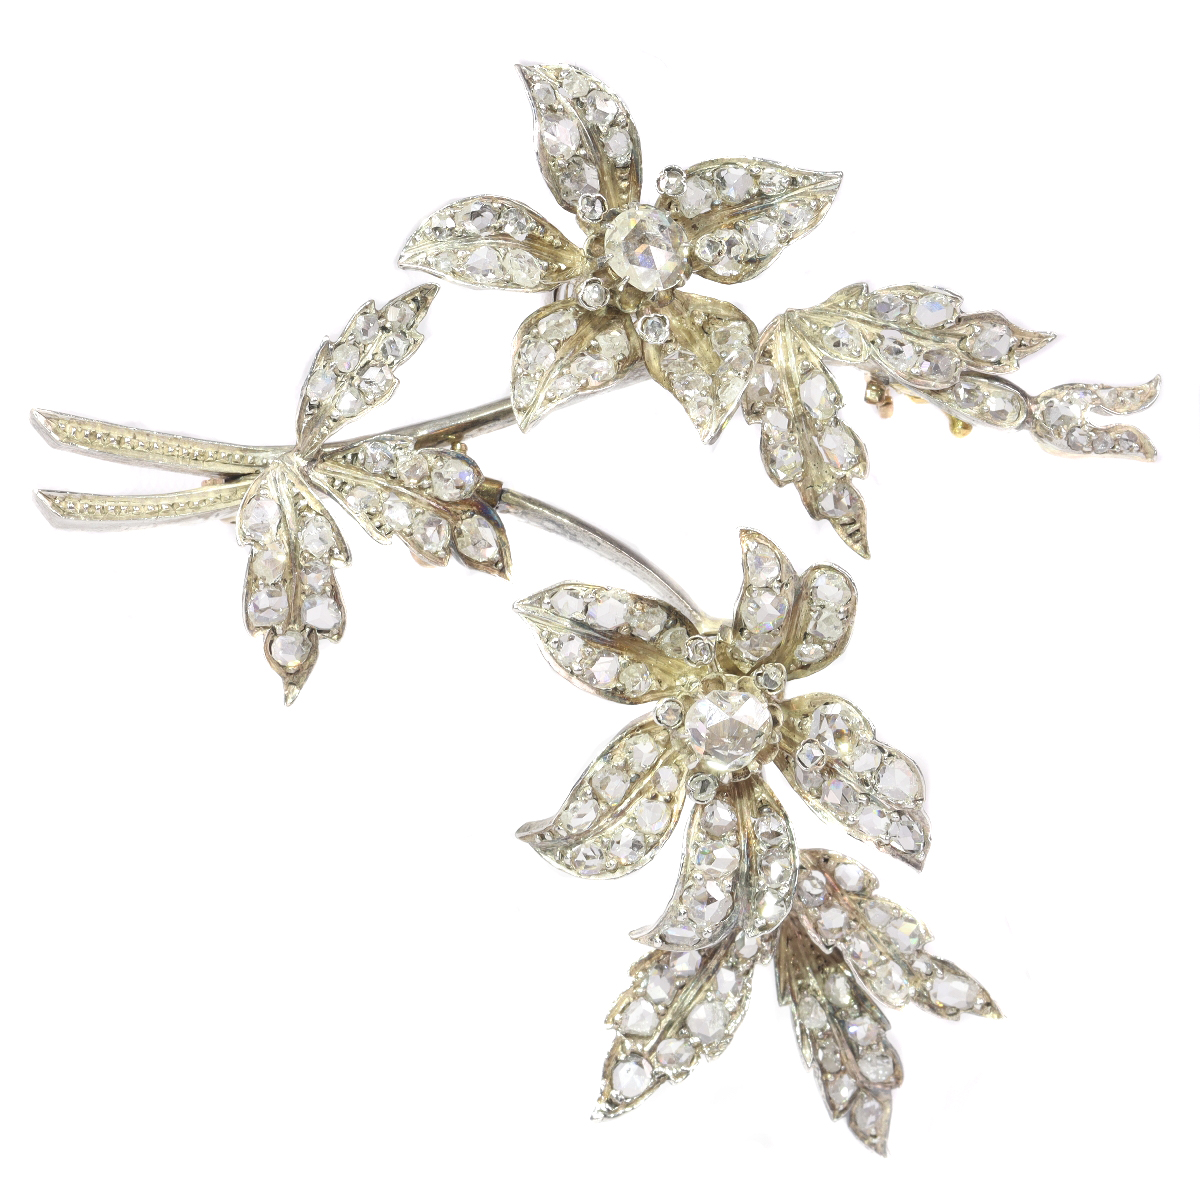 Trembling Beauty: 1850's Victorian Nature-Inspired Brooch